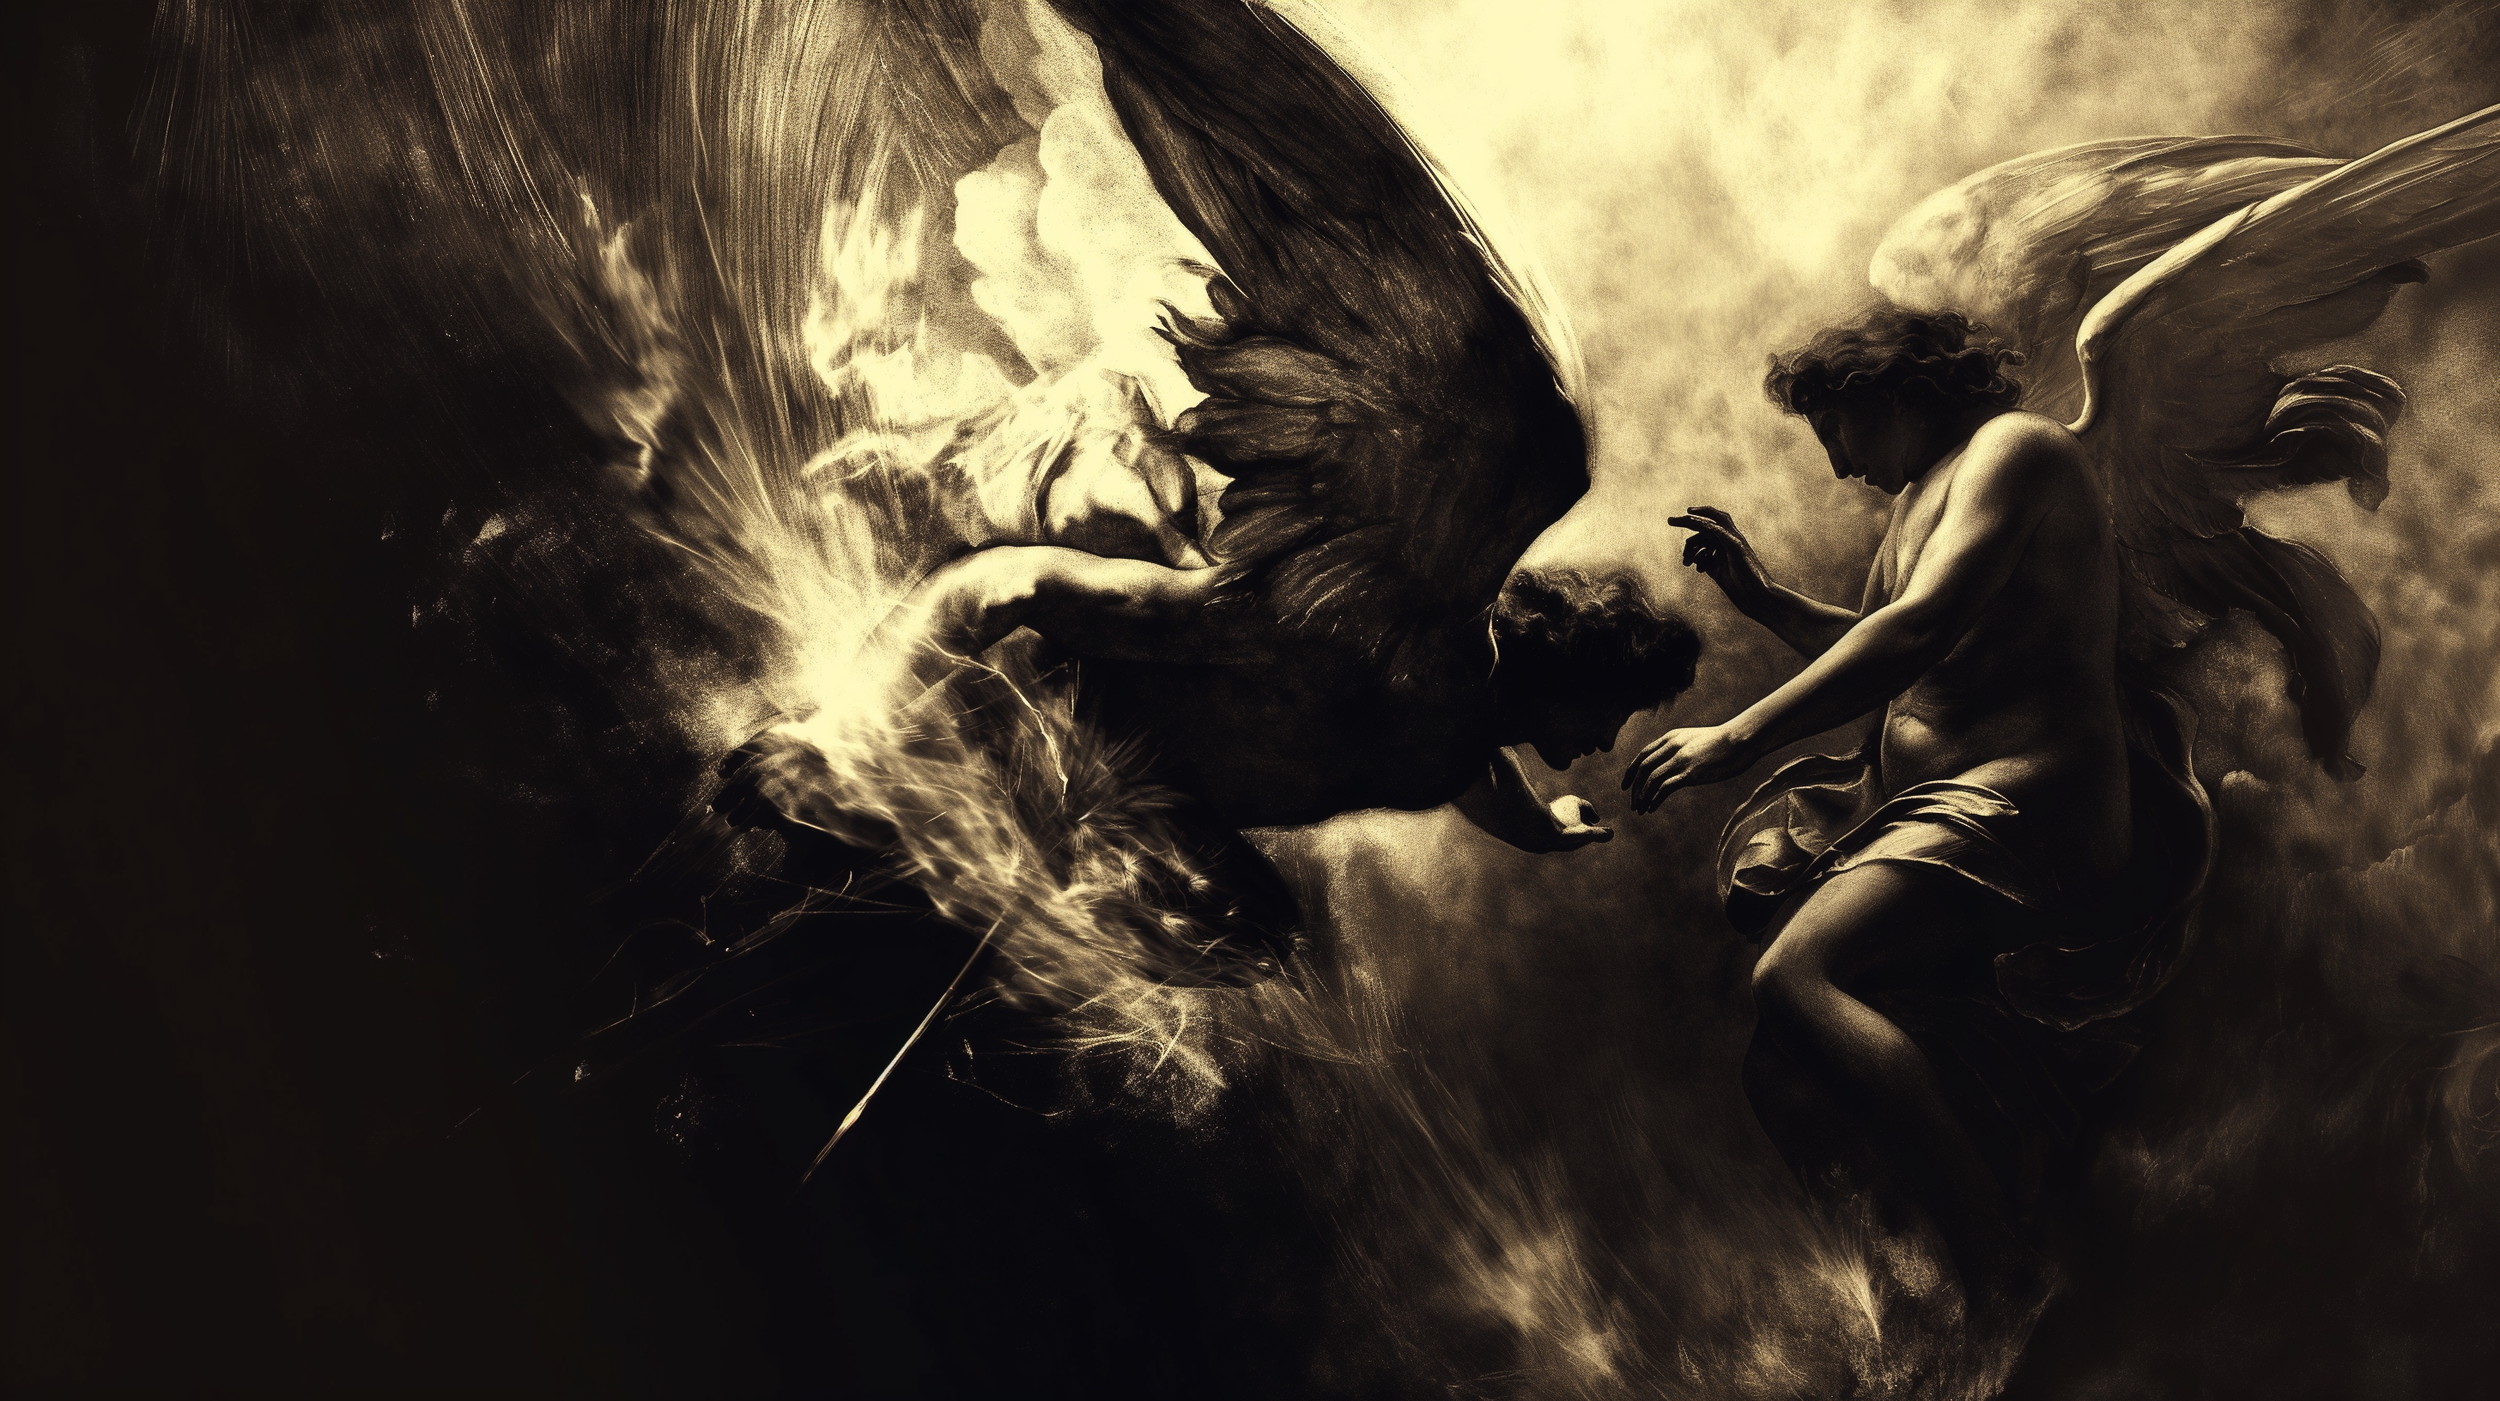 wrathcorp_glowing_angel_being_pulled_down_to_hell_angel_pulled__8facd3c3-5216-4d5e-9bfb-e4f919f0ae00.png